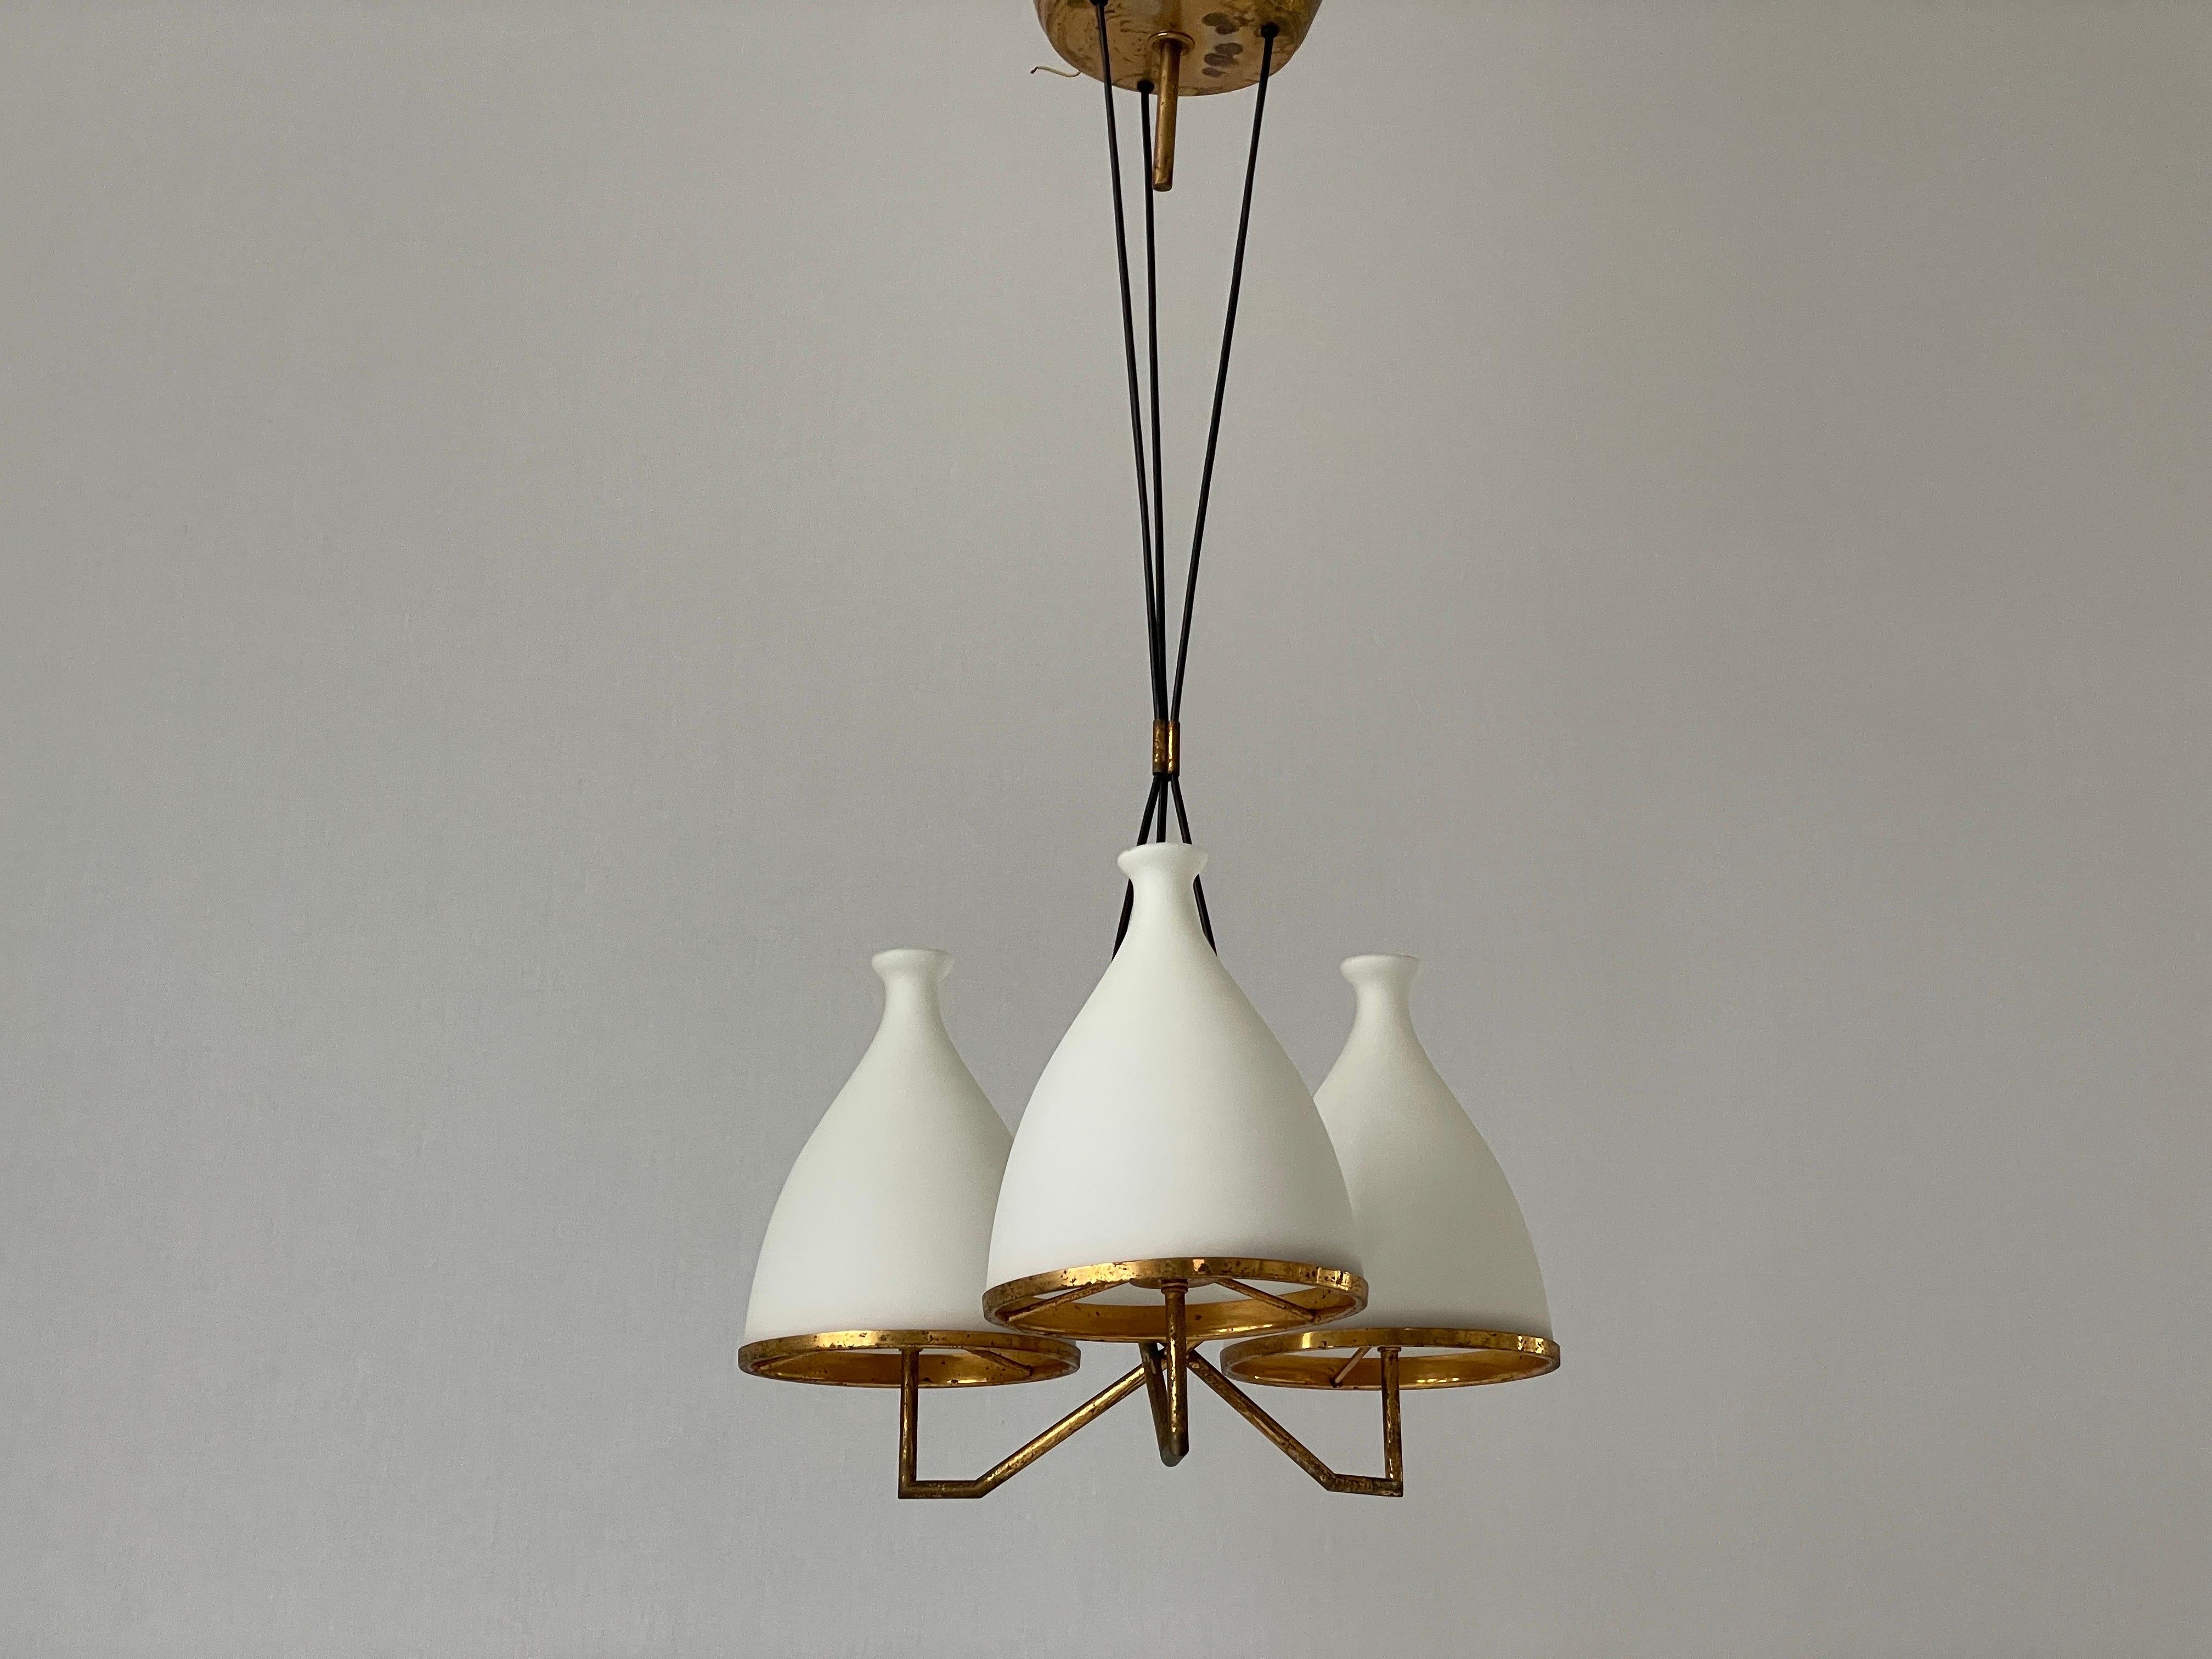 Mid-20th Century Mid-centuy Modern Chandelier by Bruno Chiarini for Stilnovo, Italy, 1950s For Sale